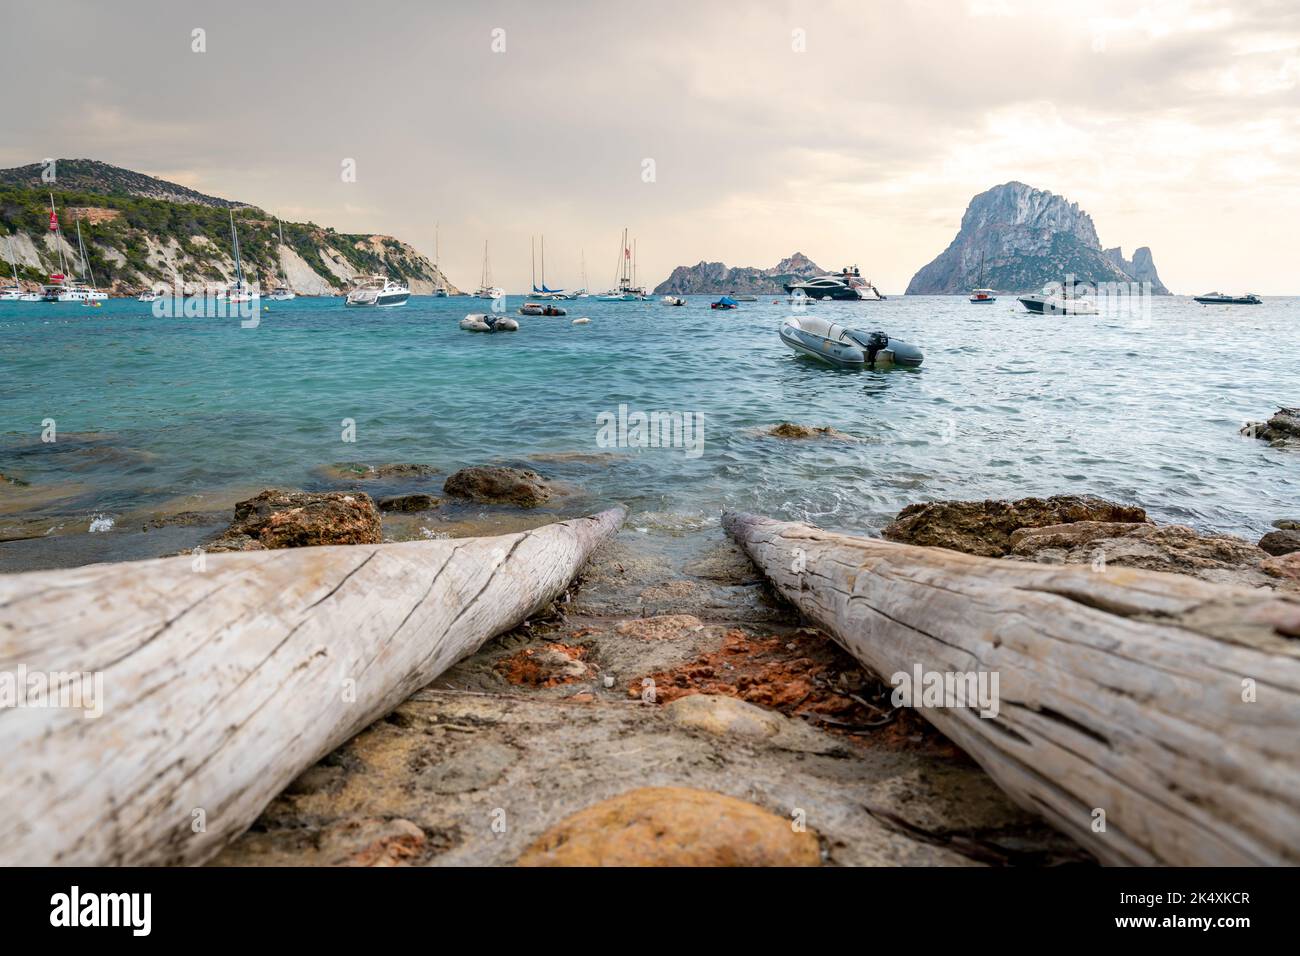 View of Es Vedra from a boat channel Stock Photo